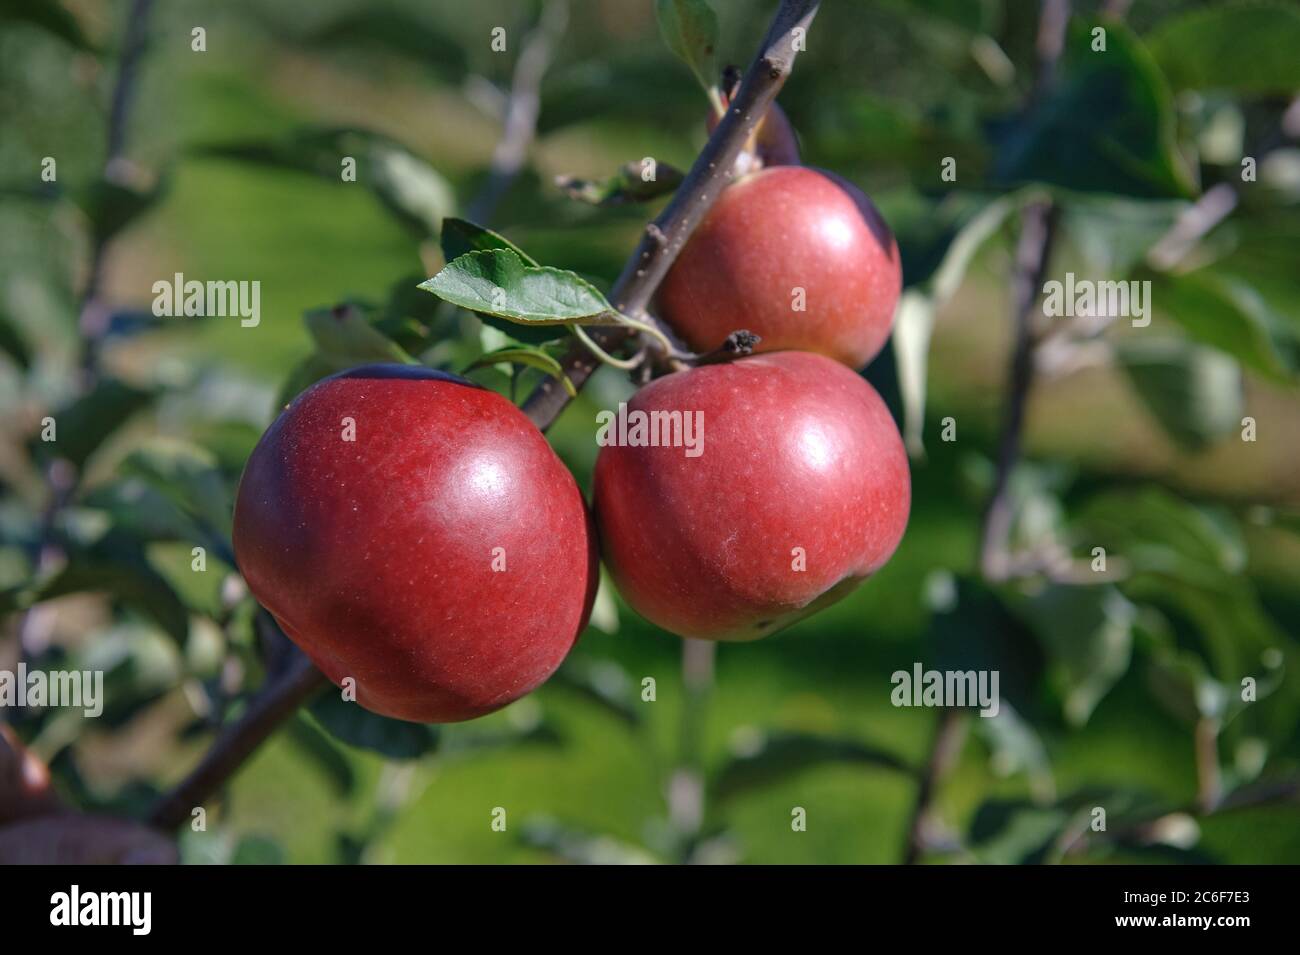 Apfel, Malus domestica Himbeerapfel von Holowaus, Apple, Malus domestica raspberry apple from Holowaus Stock Photo